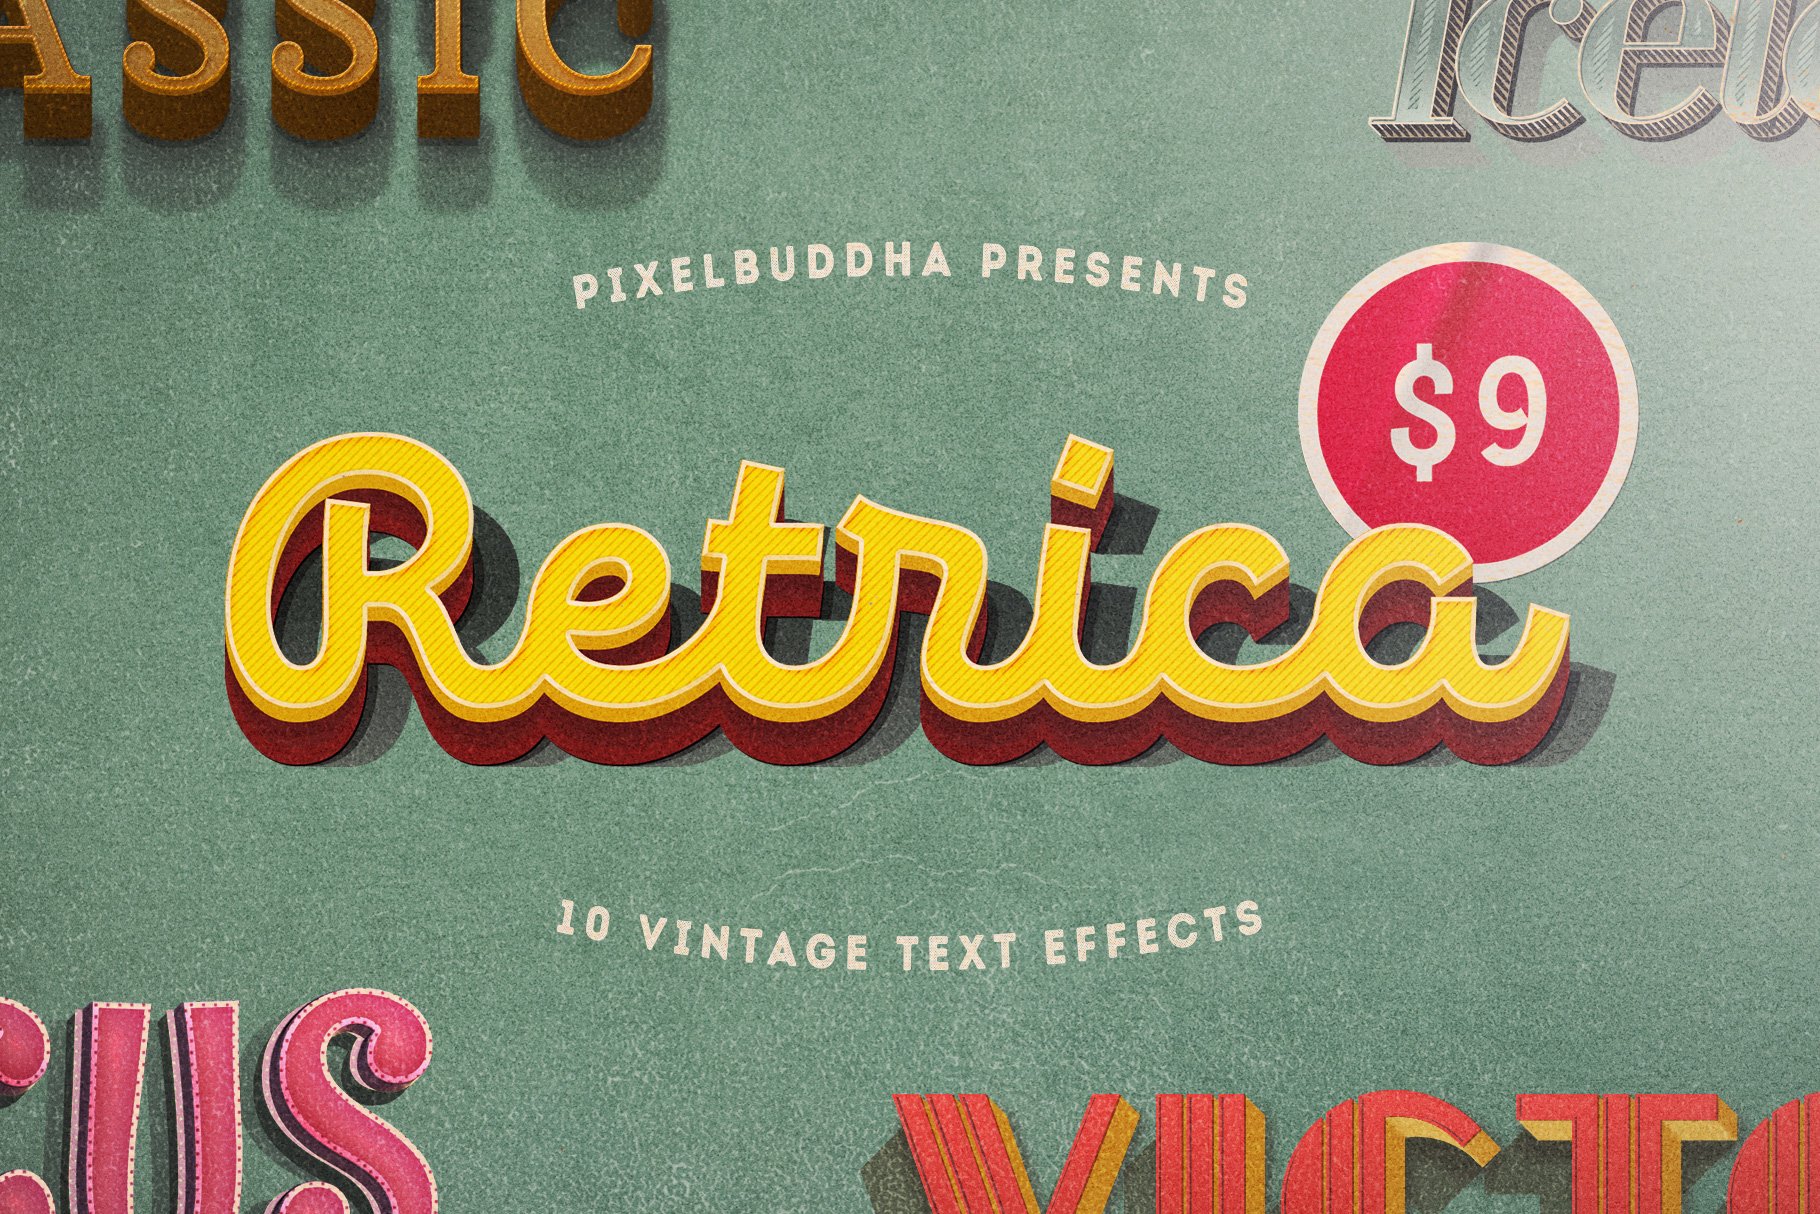 Retrica: Vintage Text Effects Packcover image.